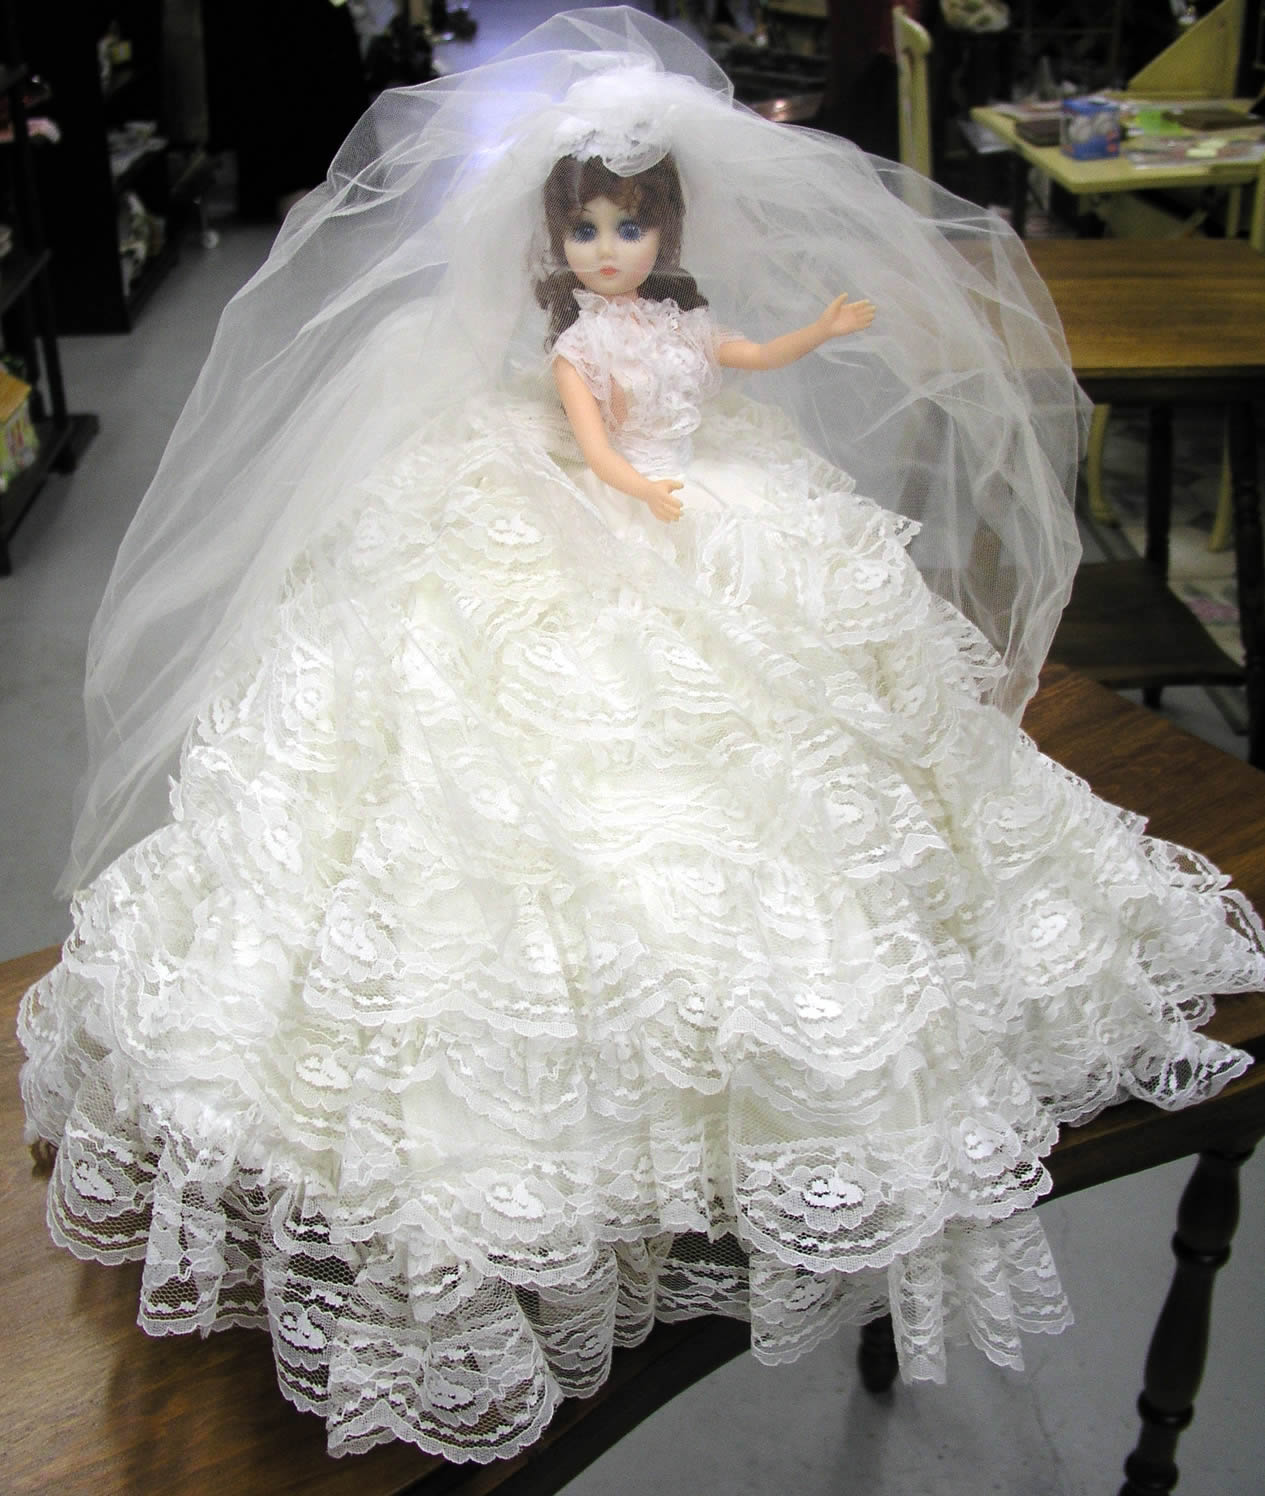 Poofy Bride Doll